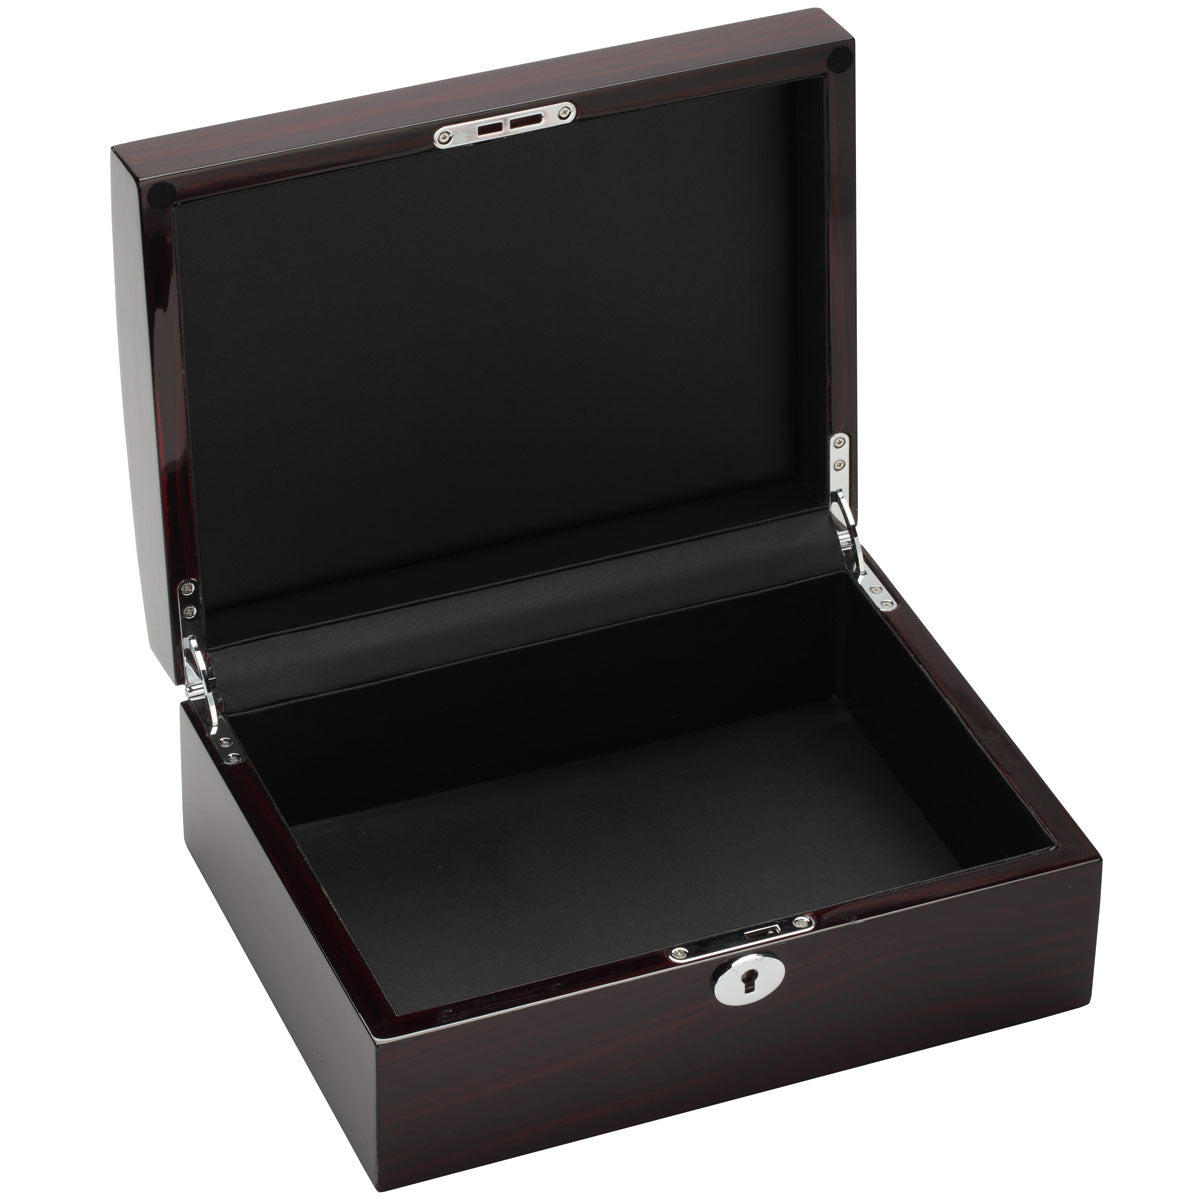 Diplomat "Prestige" 8-Watch Cases w/Removable Inner Tray